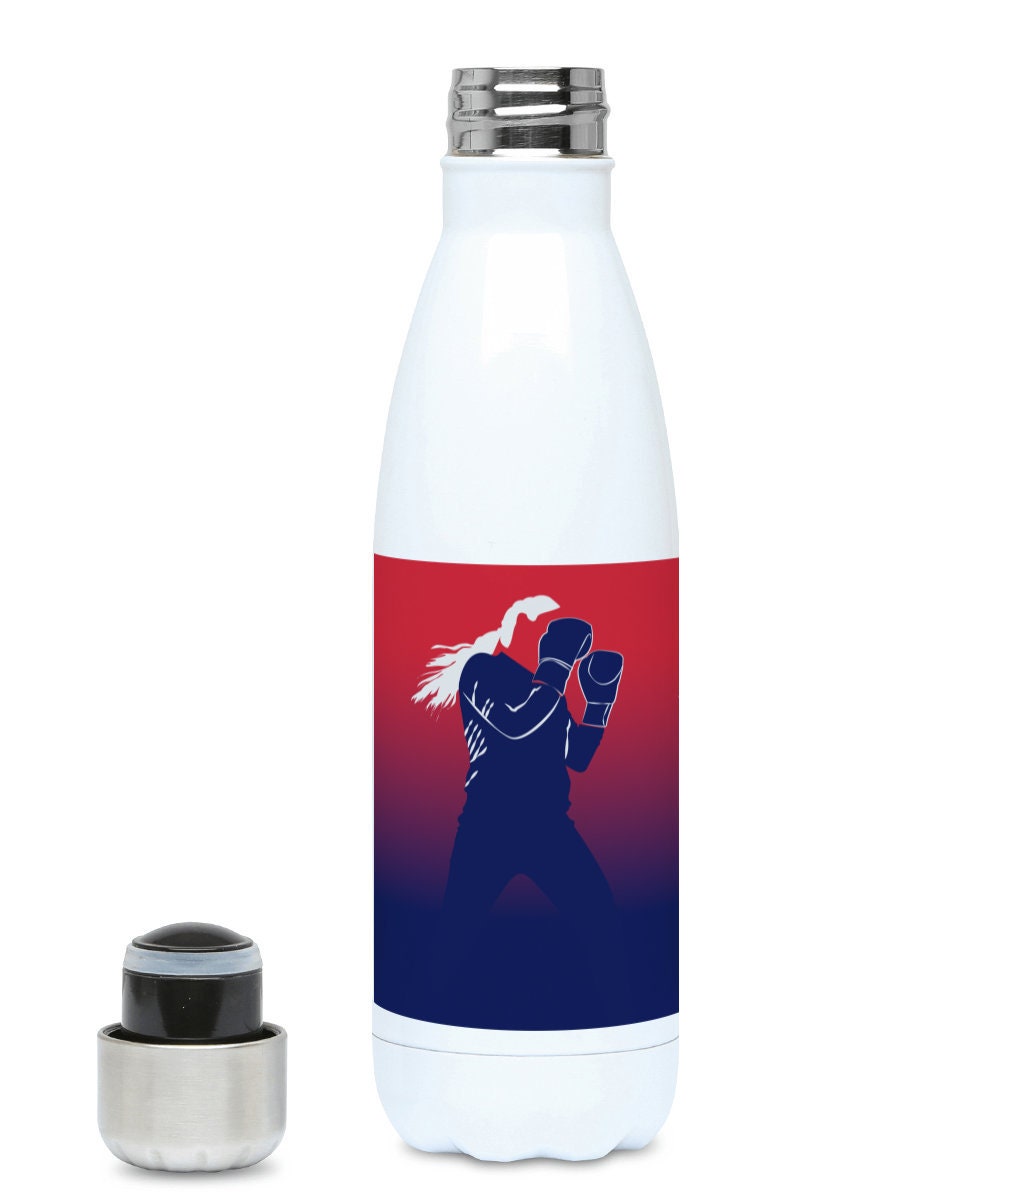 Boxing insulated bottle "In the boxer's ring" - Customizable